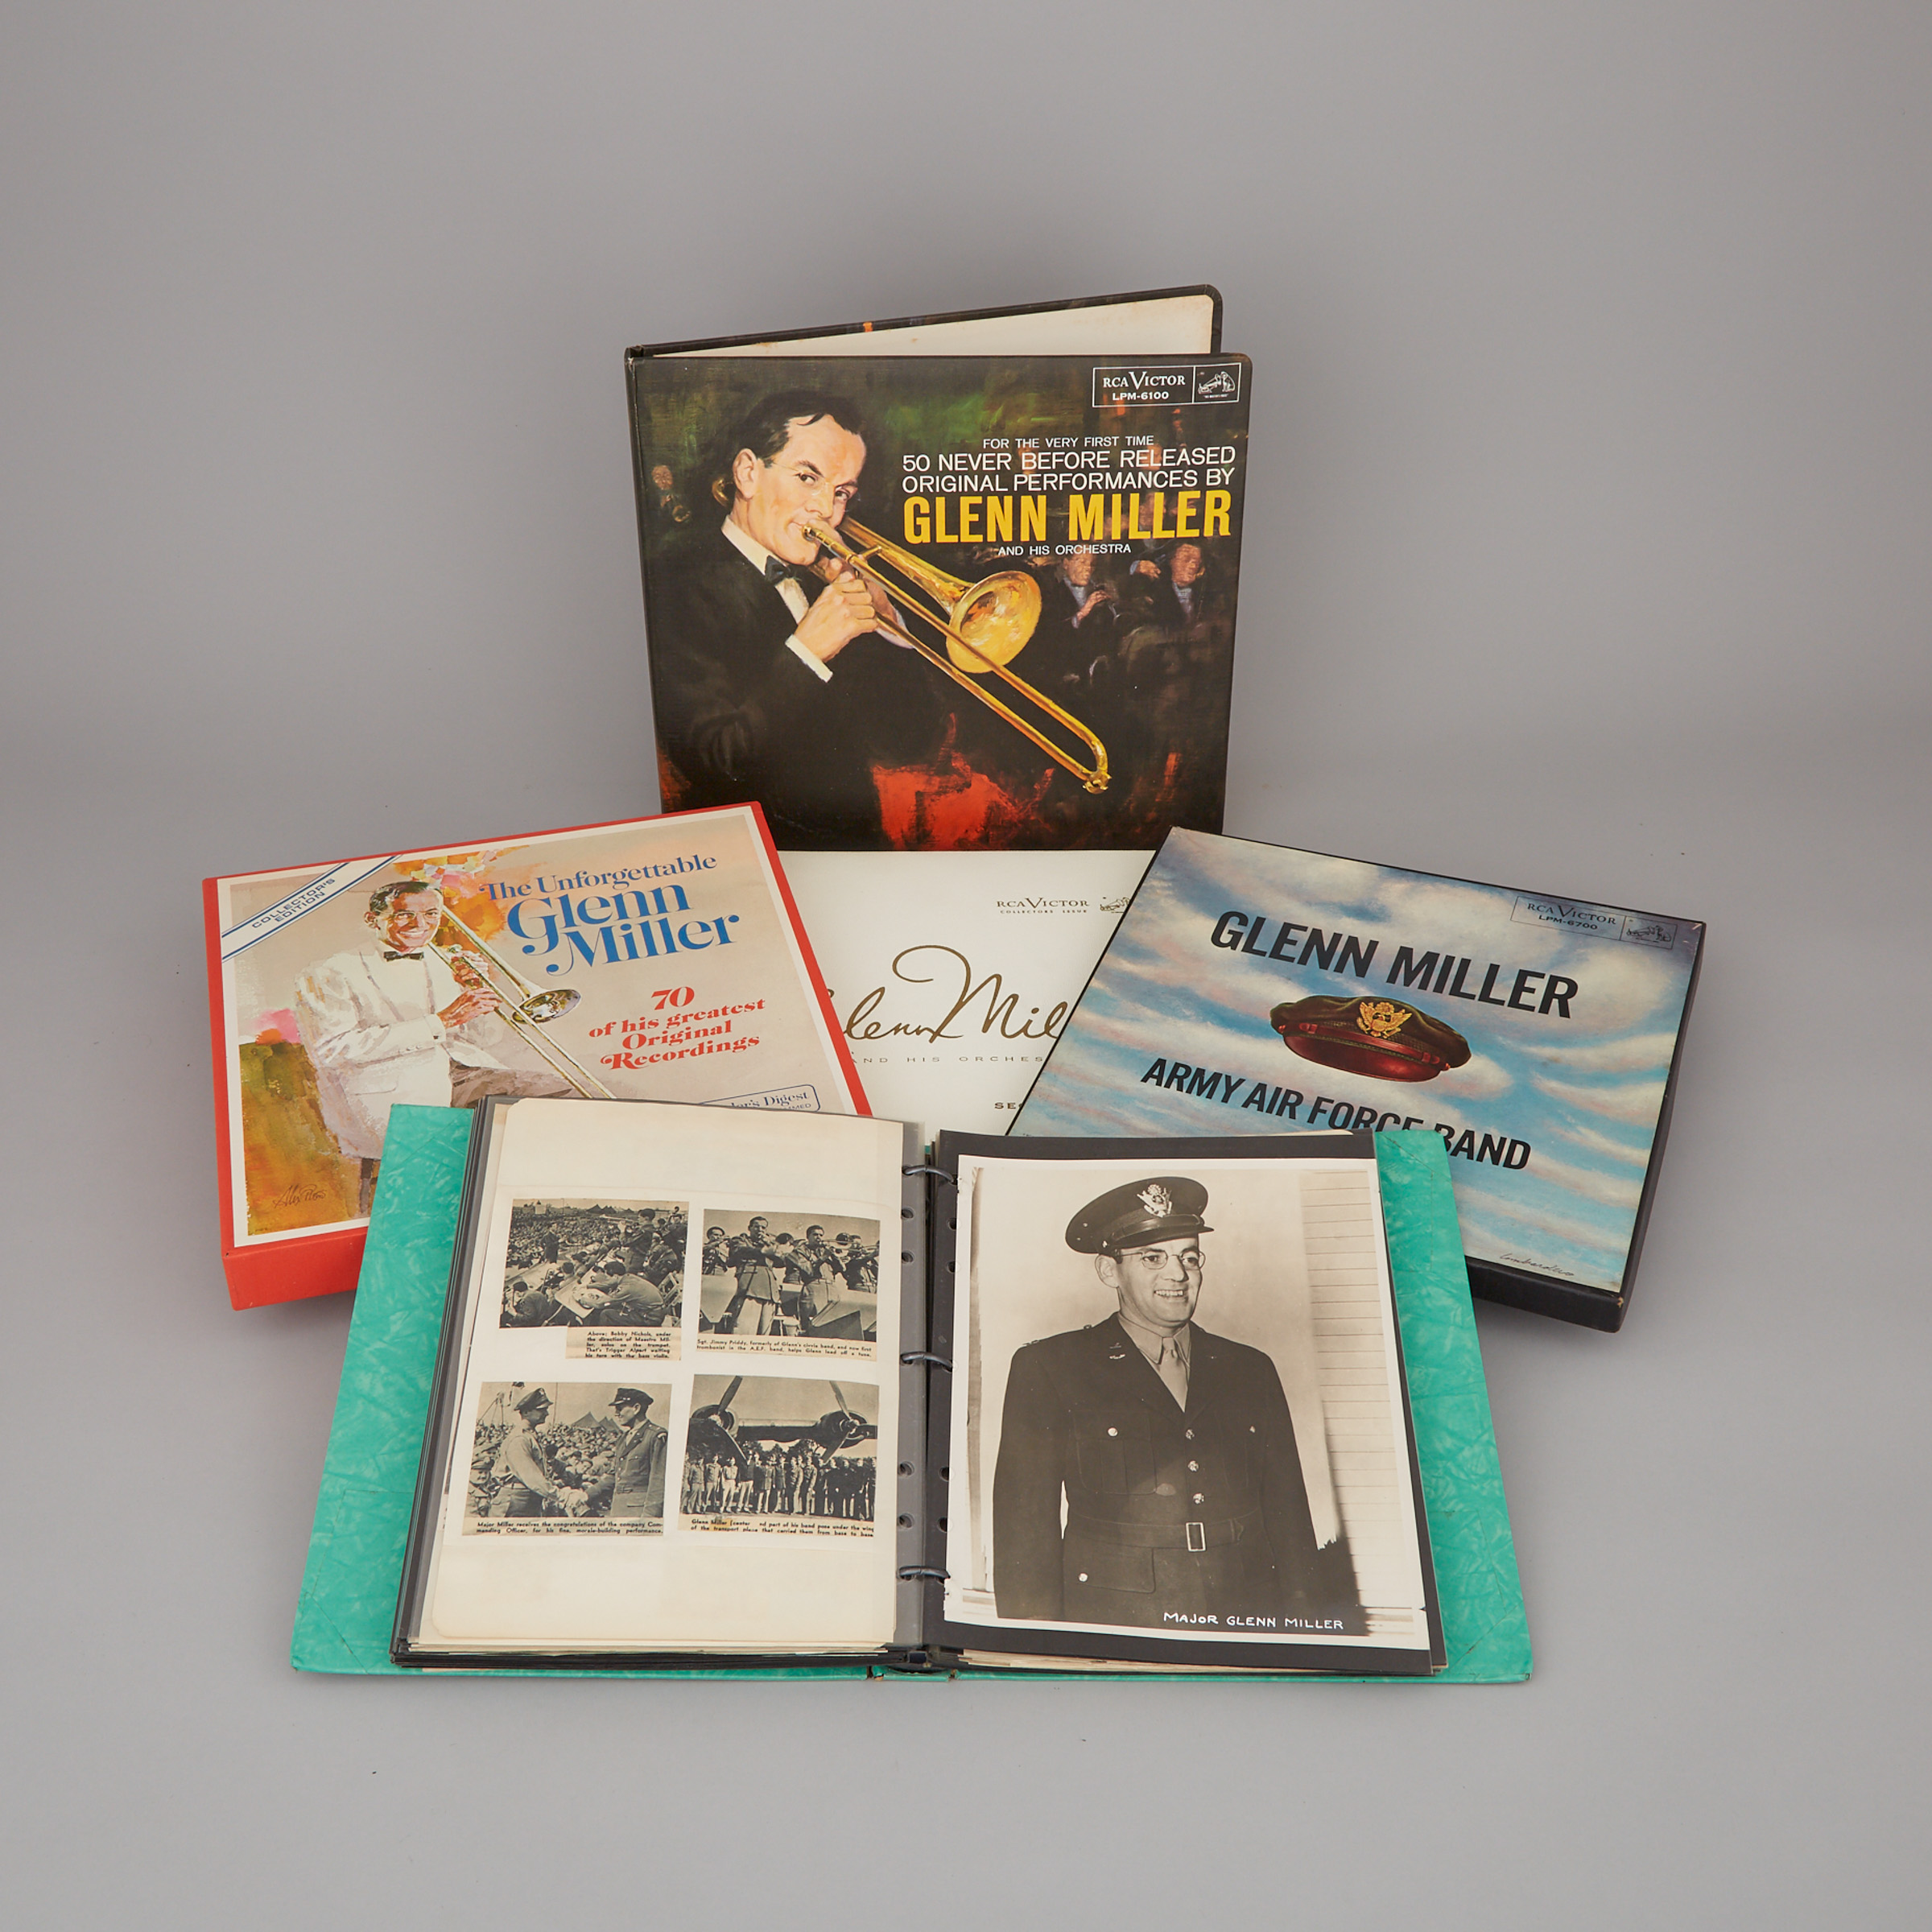 Archive of Material Relating to Glenn Miller and His Orchestra, mid 20th century